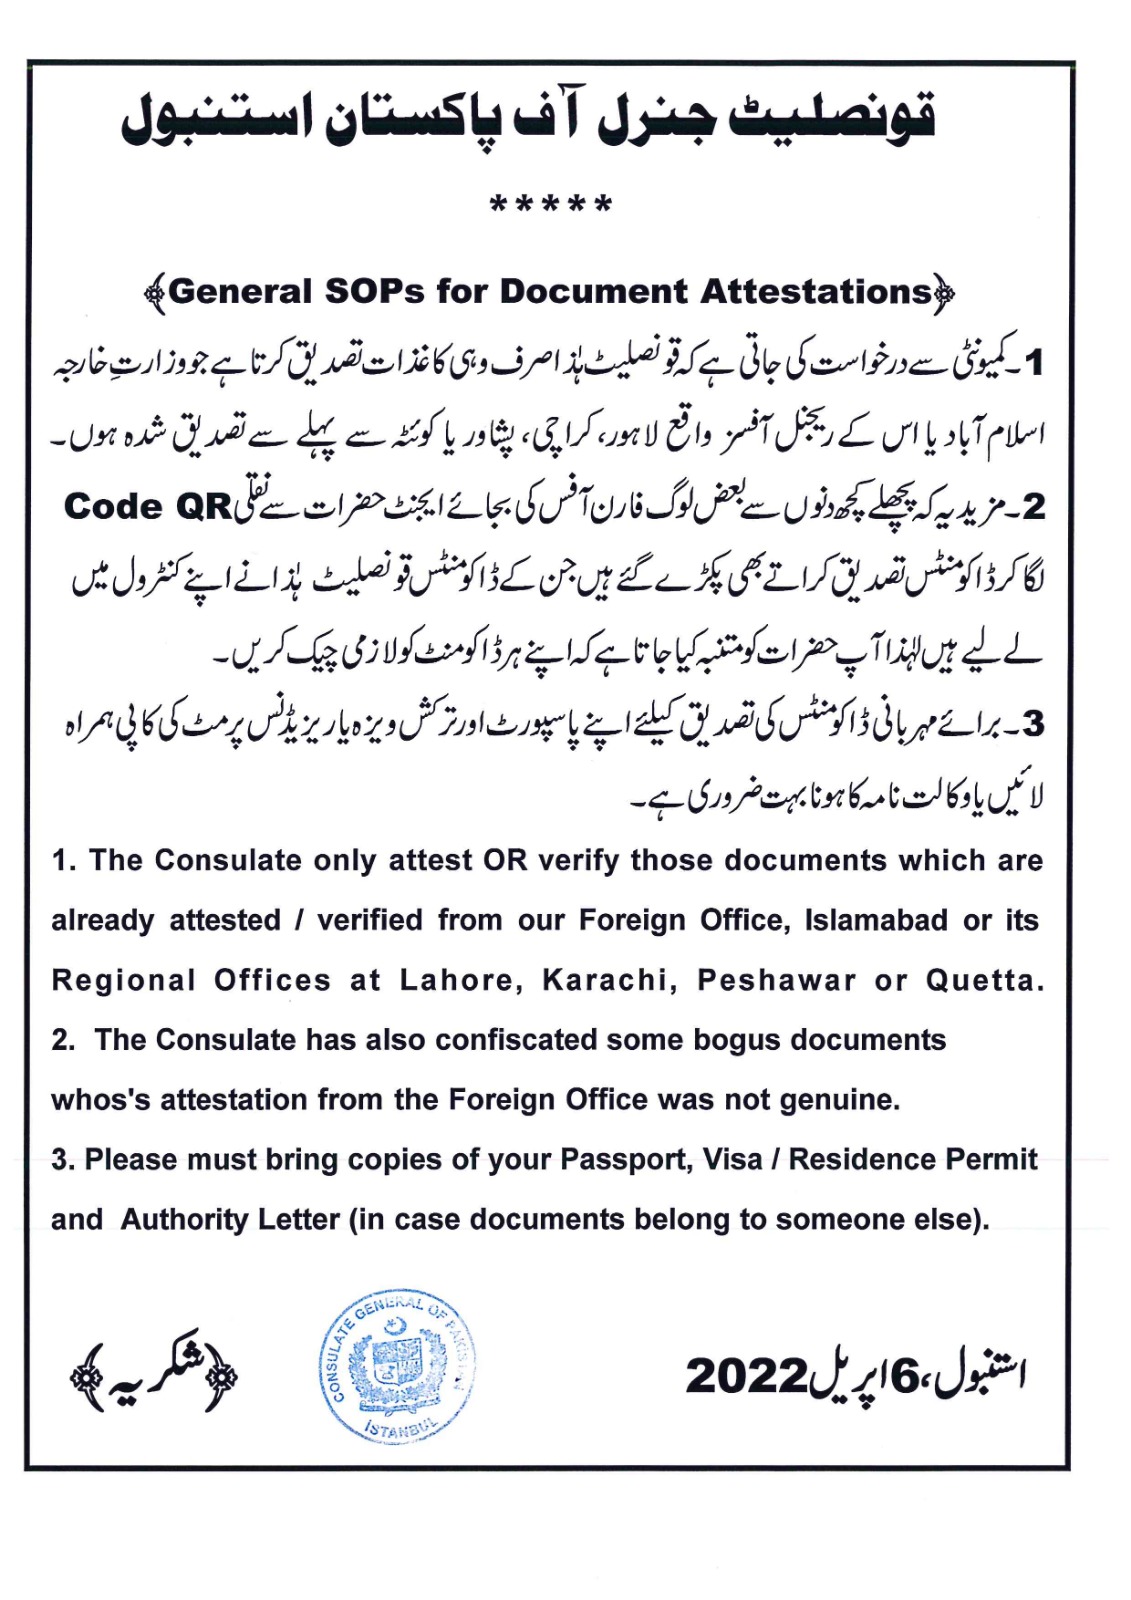 General Instructions for Consular Services